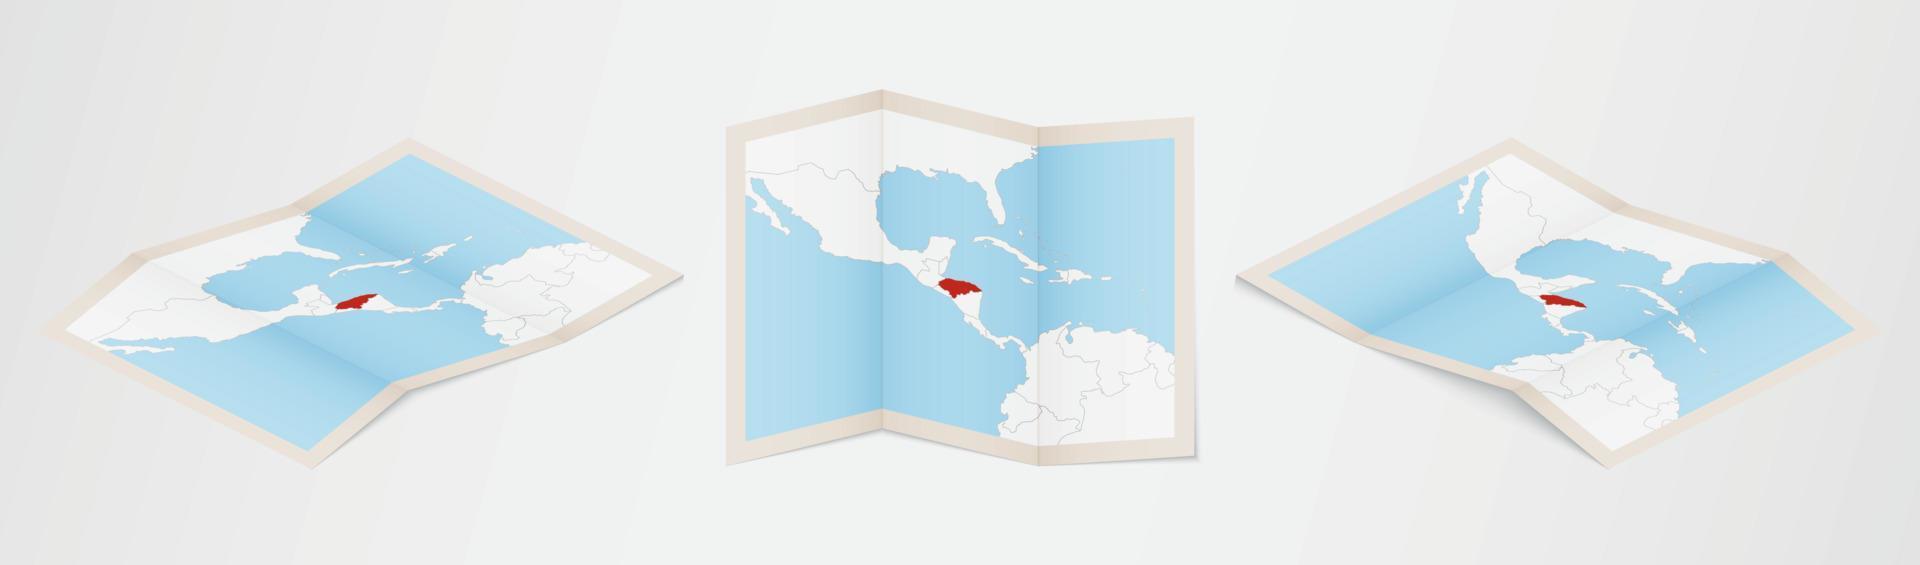 Folded map of Honduras in three different versions. vector